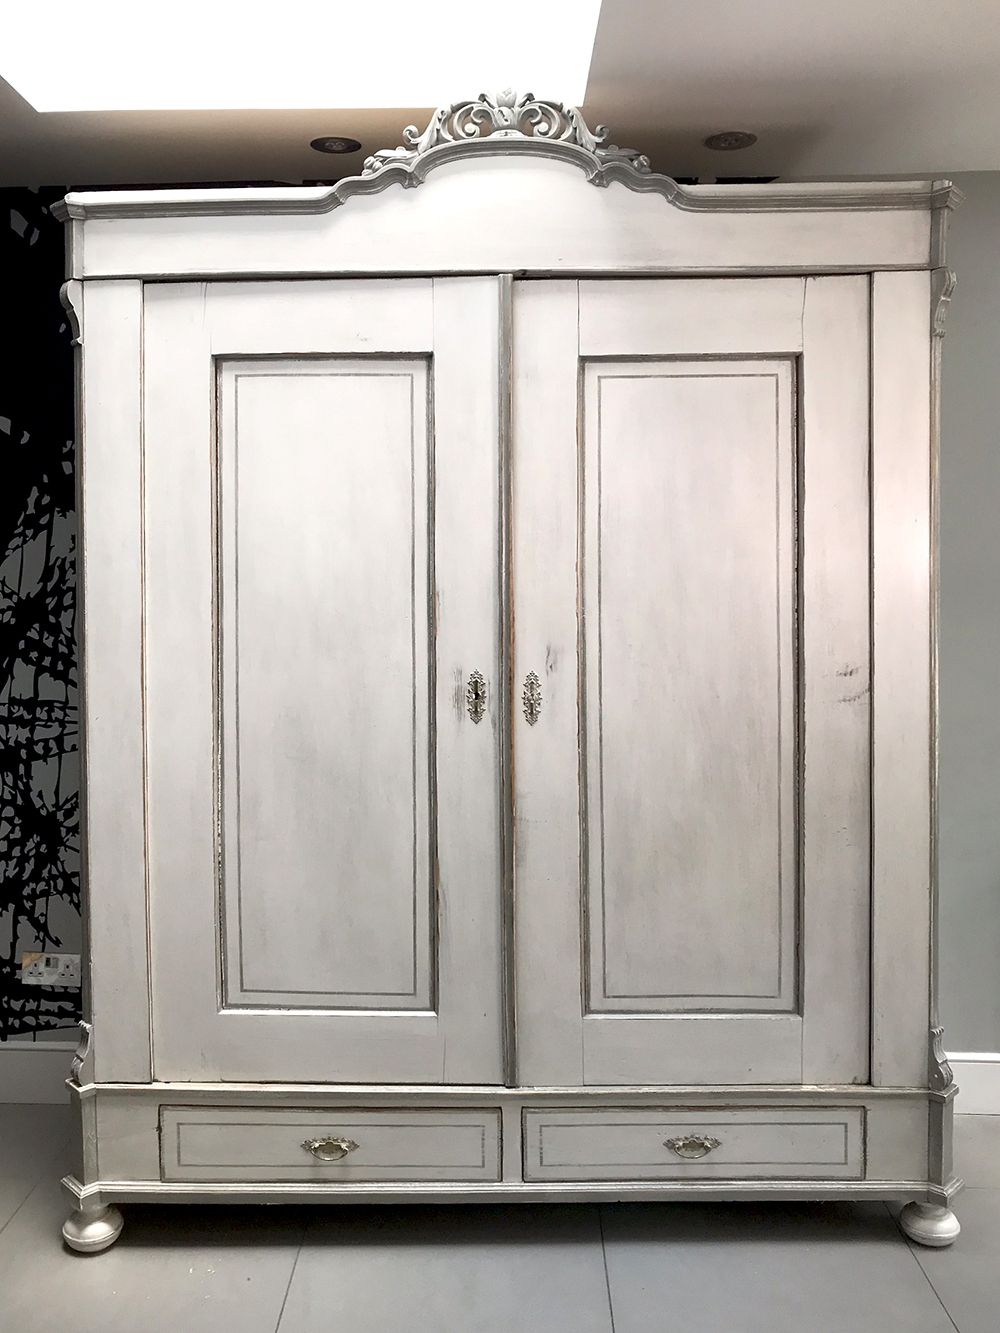 Antique French Painted Armoire – Sold | Napoleonrockefeller – Vintage And  Retro Furniture, Bespoke Hand Crafted Chairs And Seating Intended For Vintage French Wardrobes (View 3 of 20)